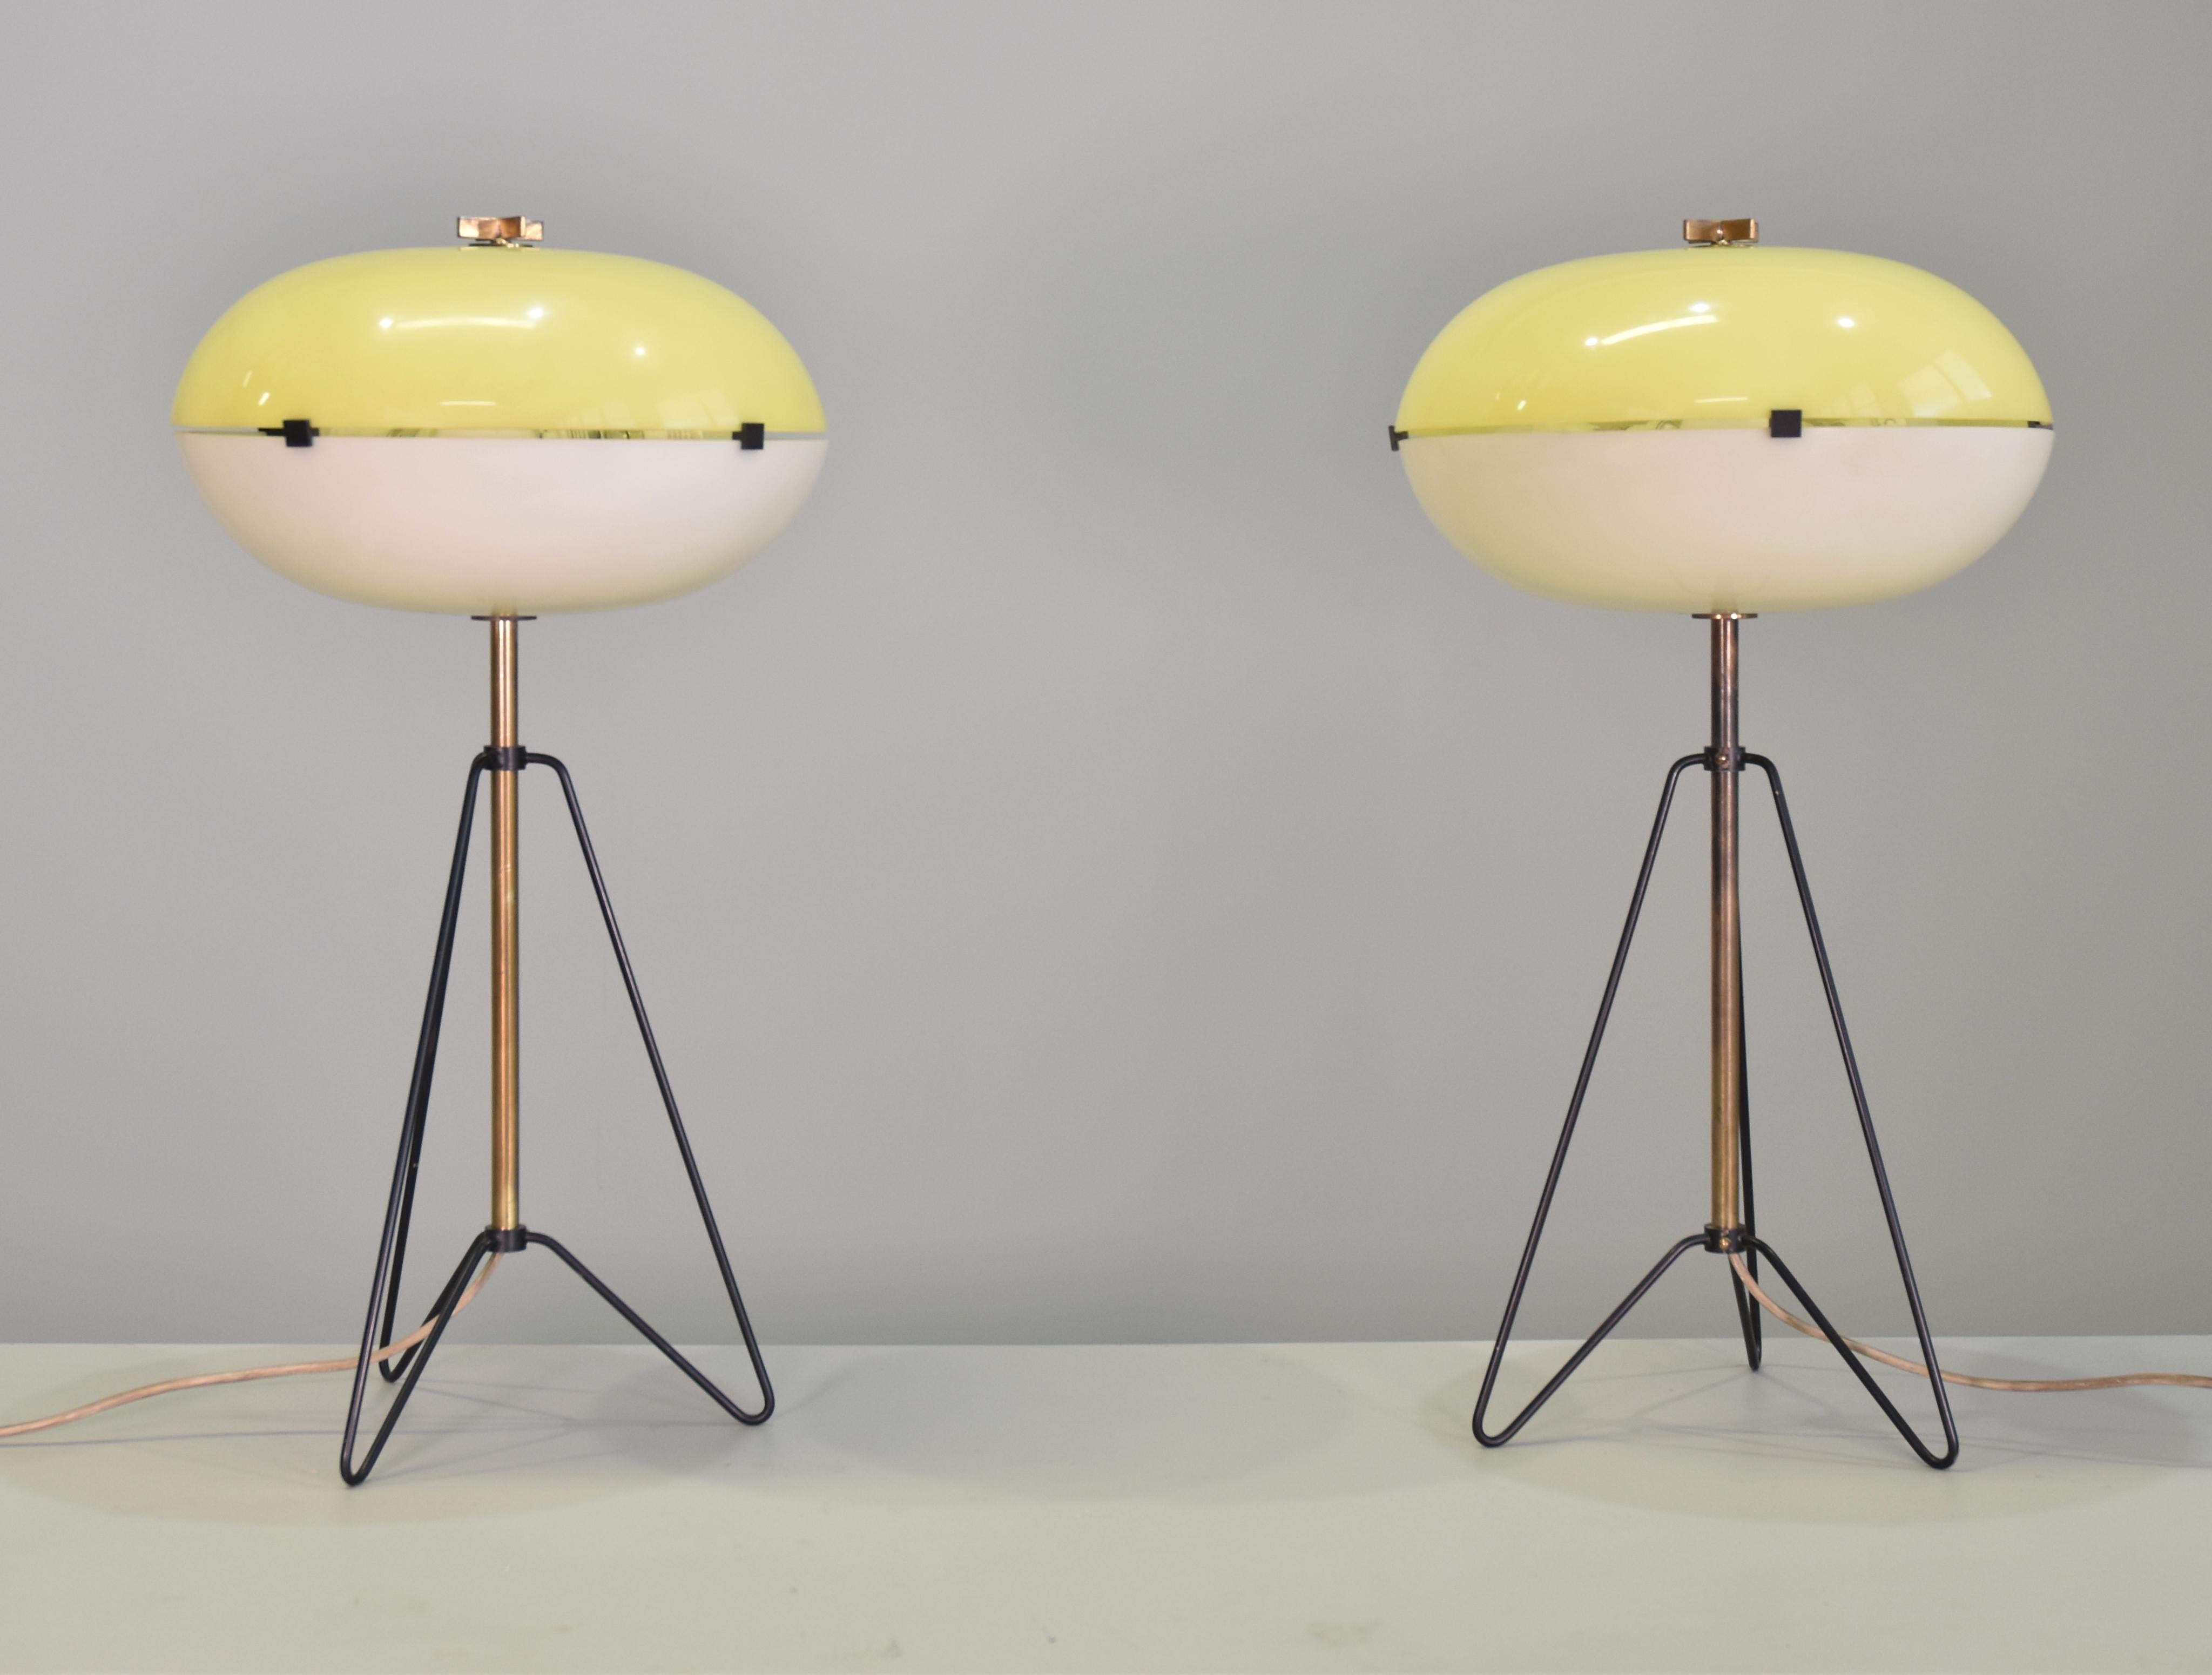 Pair of Large Brass and Methacrylate Lamps Italy 1955 Published very rare brass, black lacquered metal, lucite shades in white and yellow methacrylate plastic resin, adjustable brass arm. Original Stilnovo stamp inside the shade. Famous design such